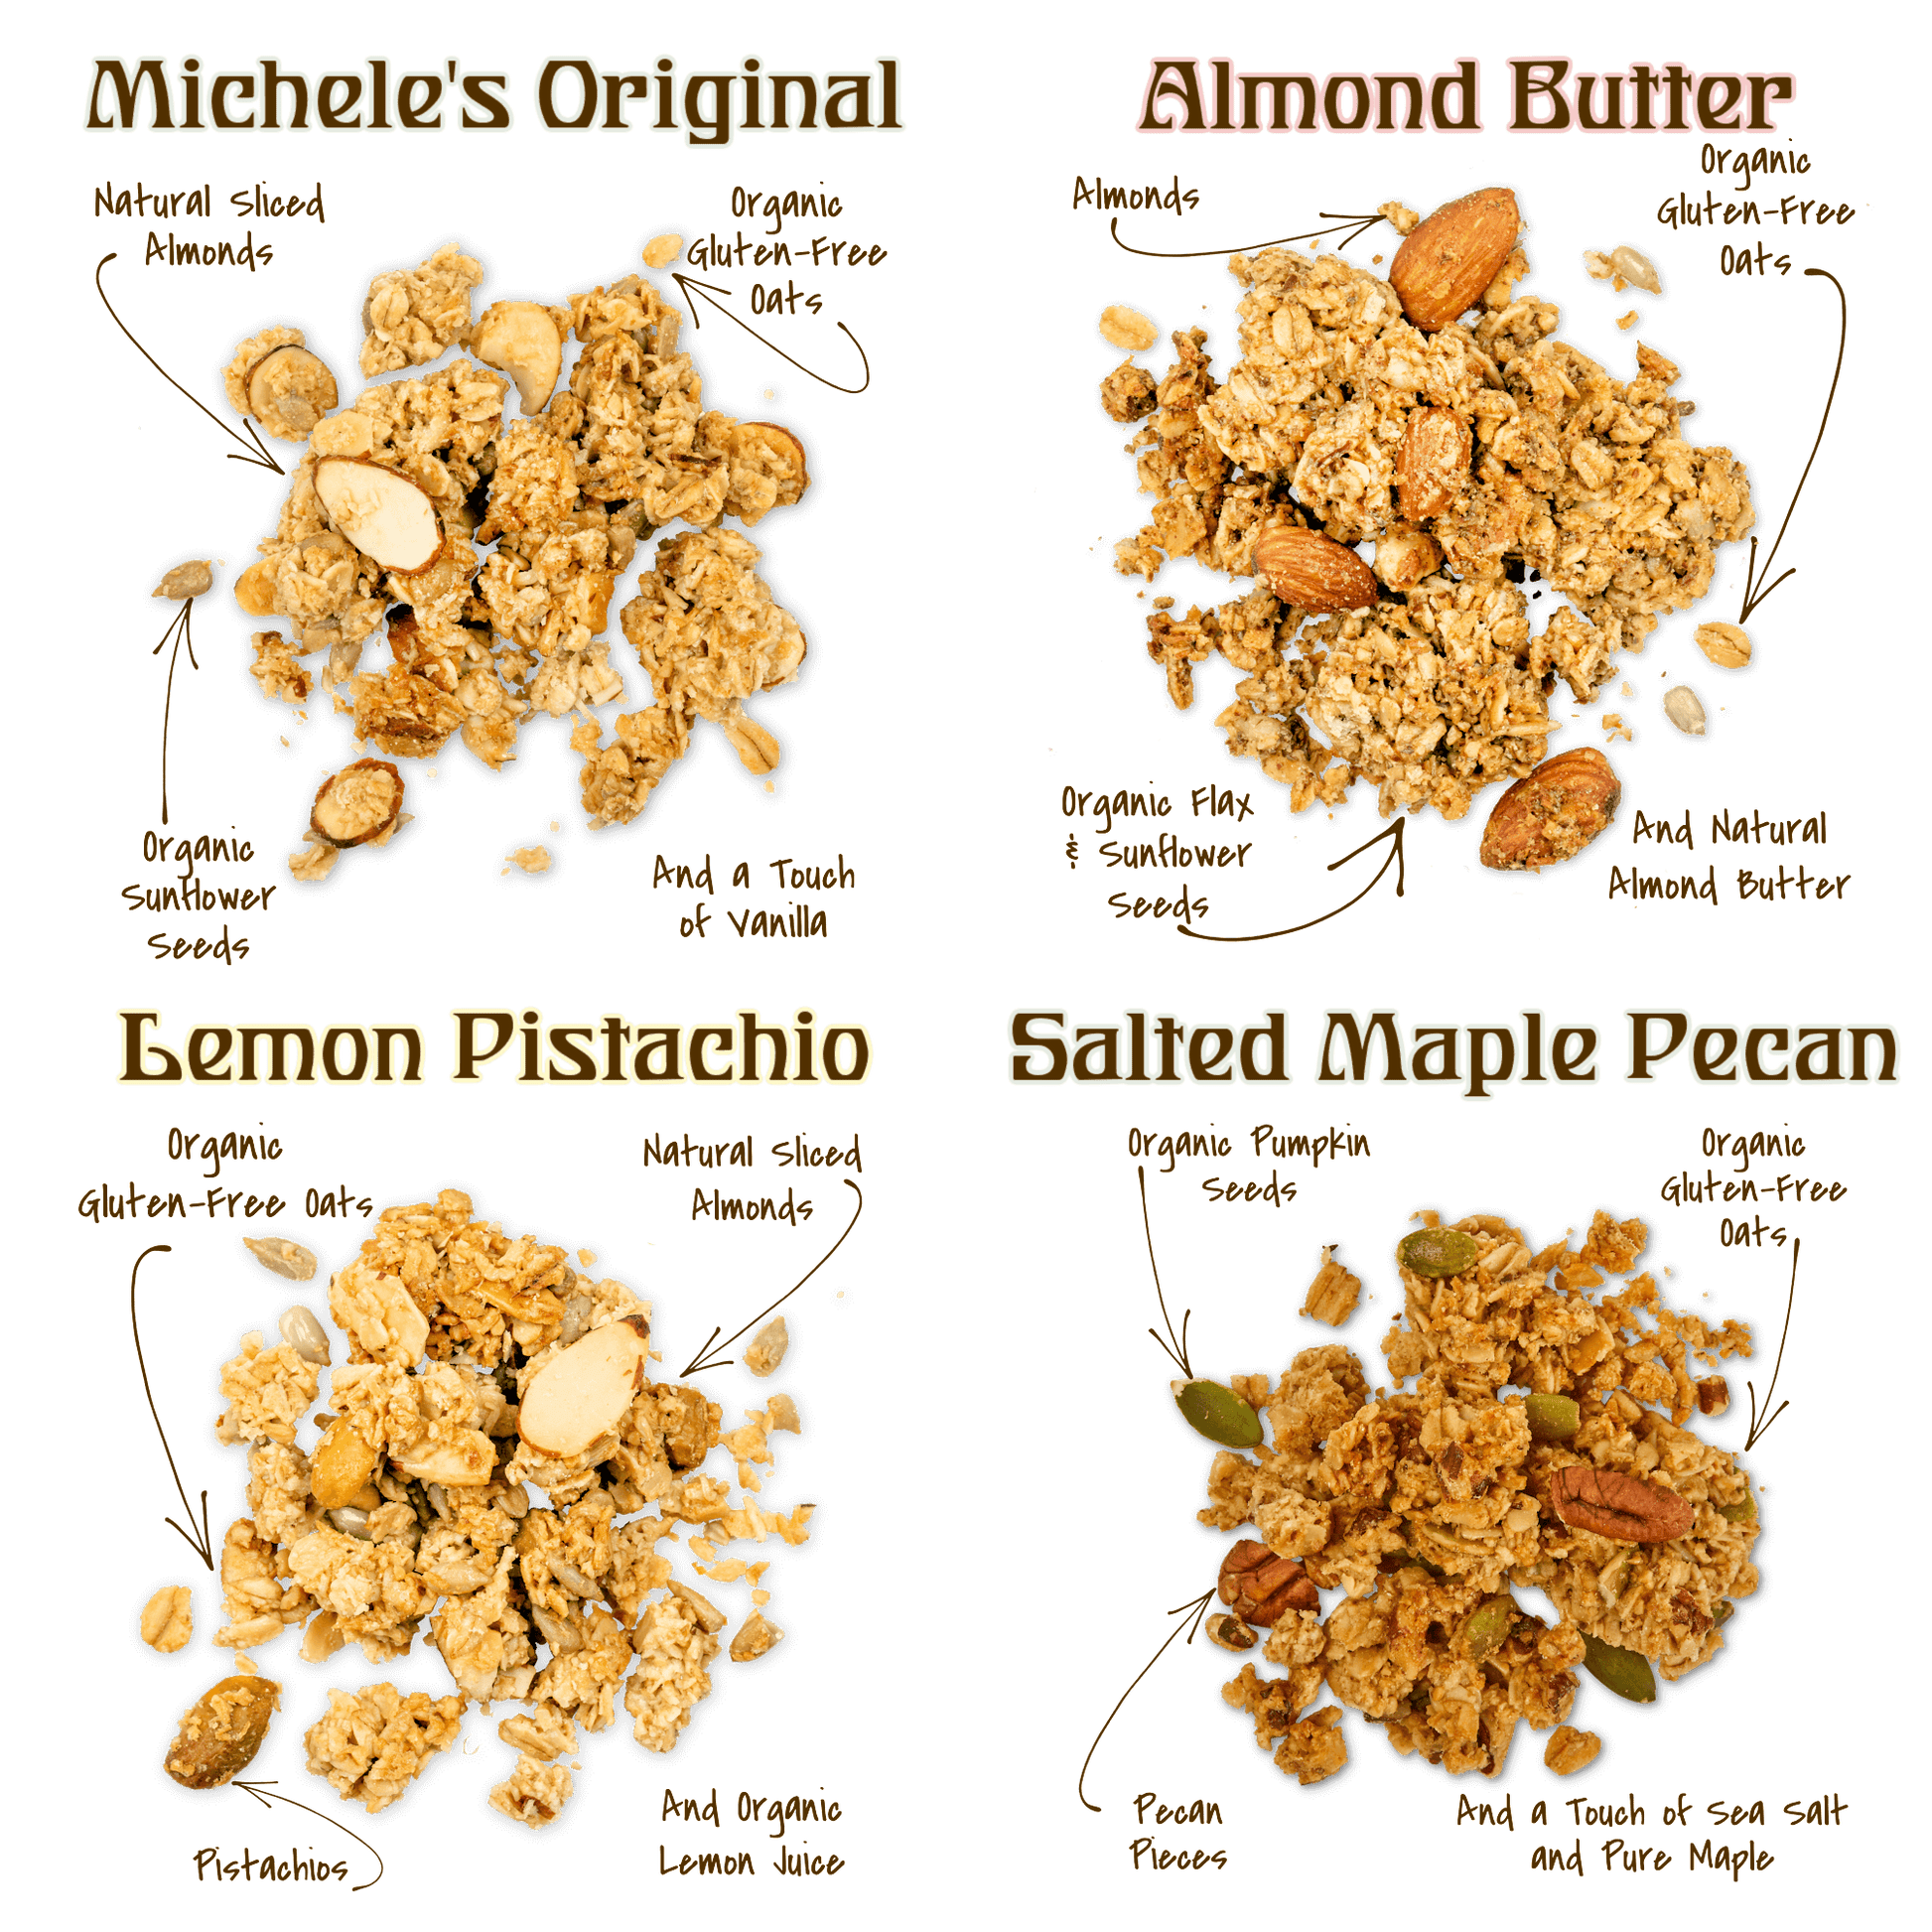 Clusters from the Granola Mini Sampler Variety 4-pack - Original, Almond Butter, Lemon Pistachio and Salted Maple Pecan